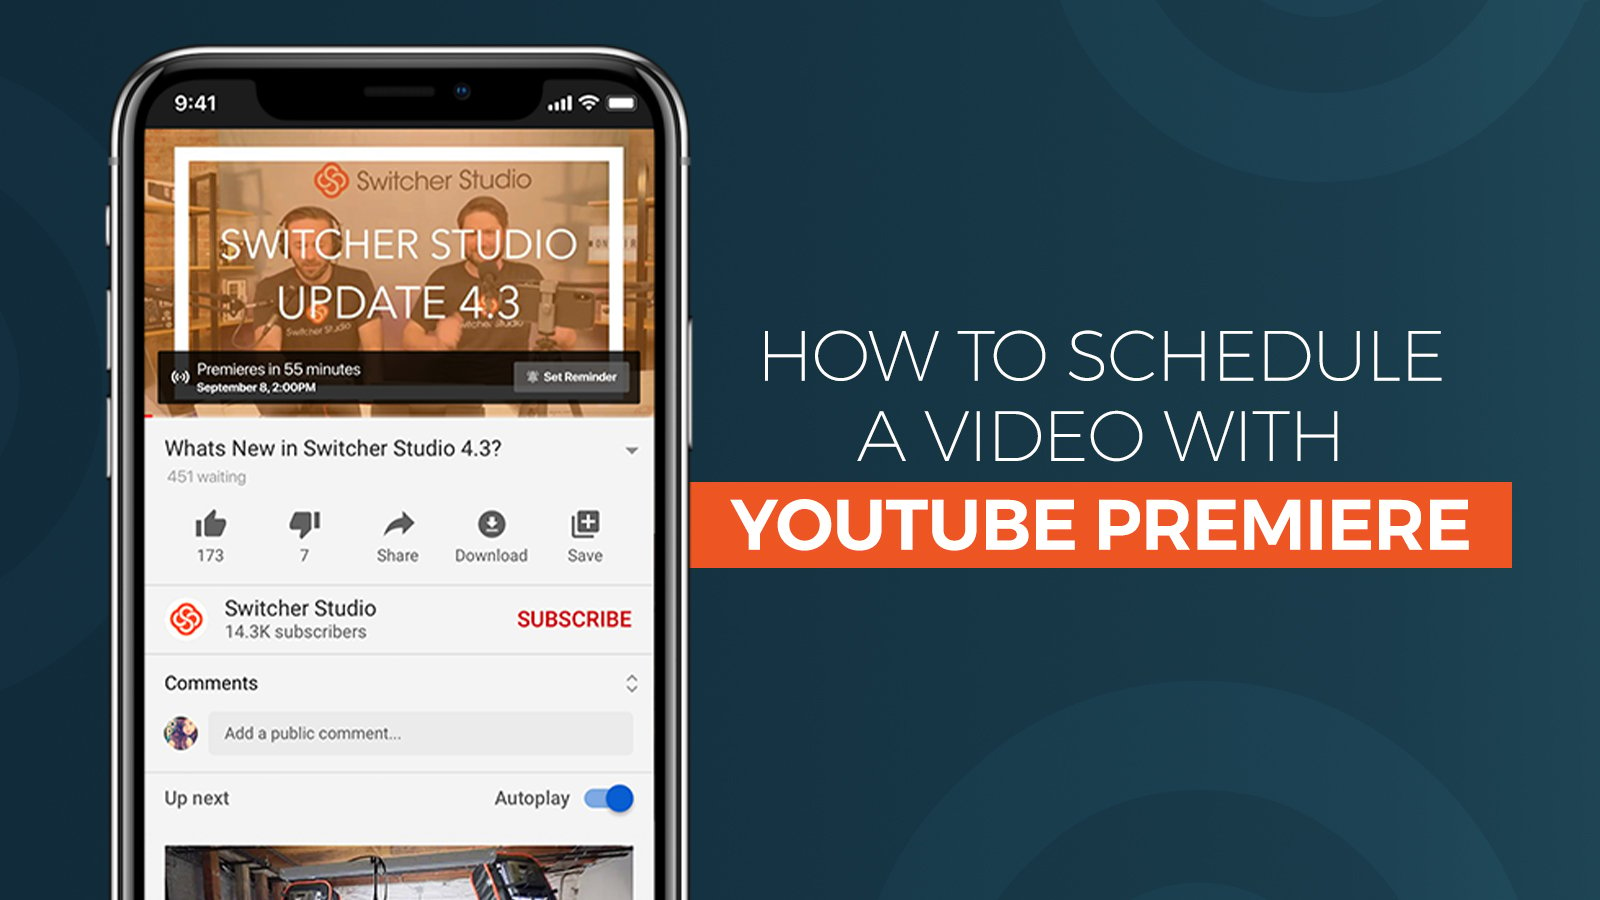 How To Use Youtube Premiere To Schedule A Video